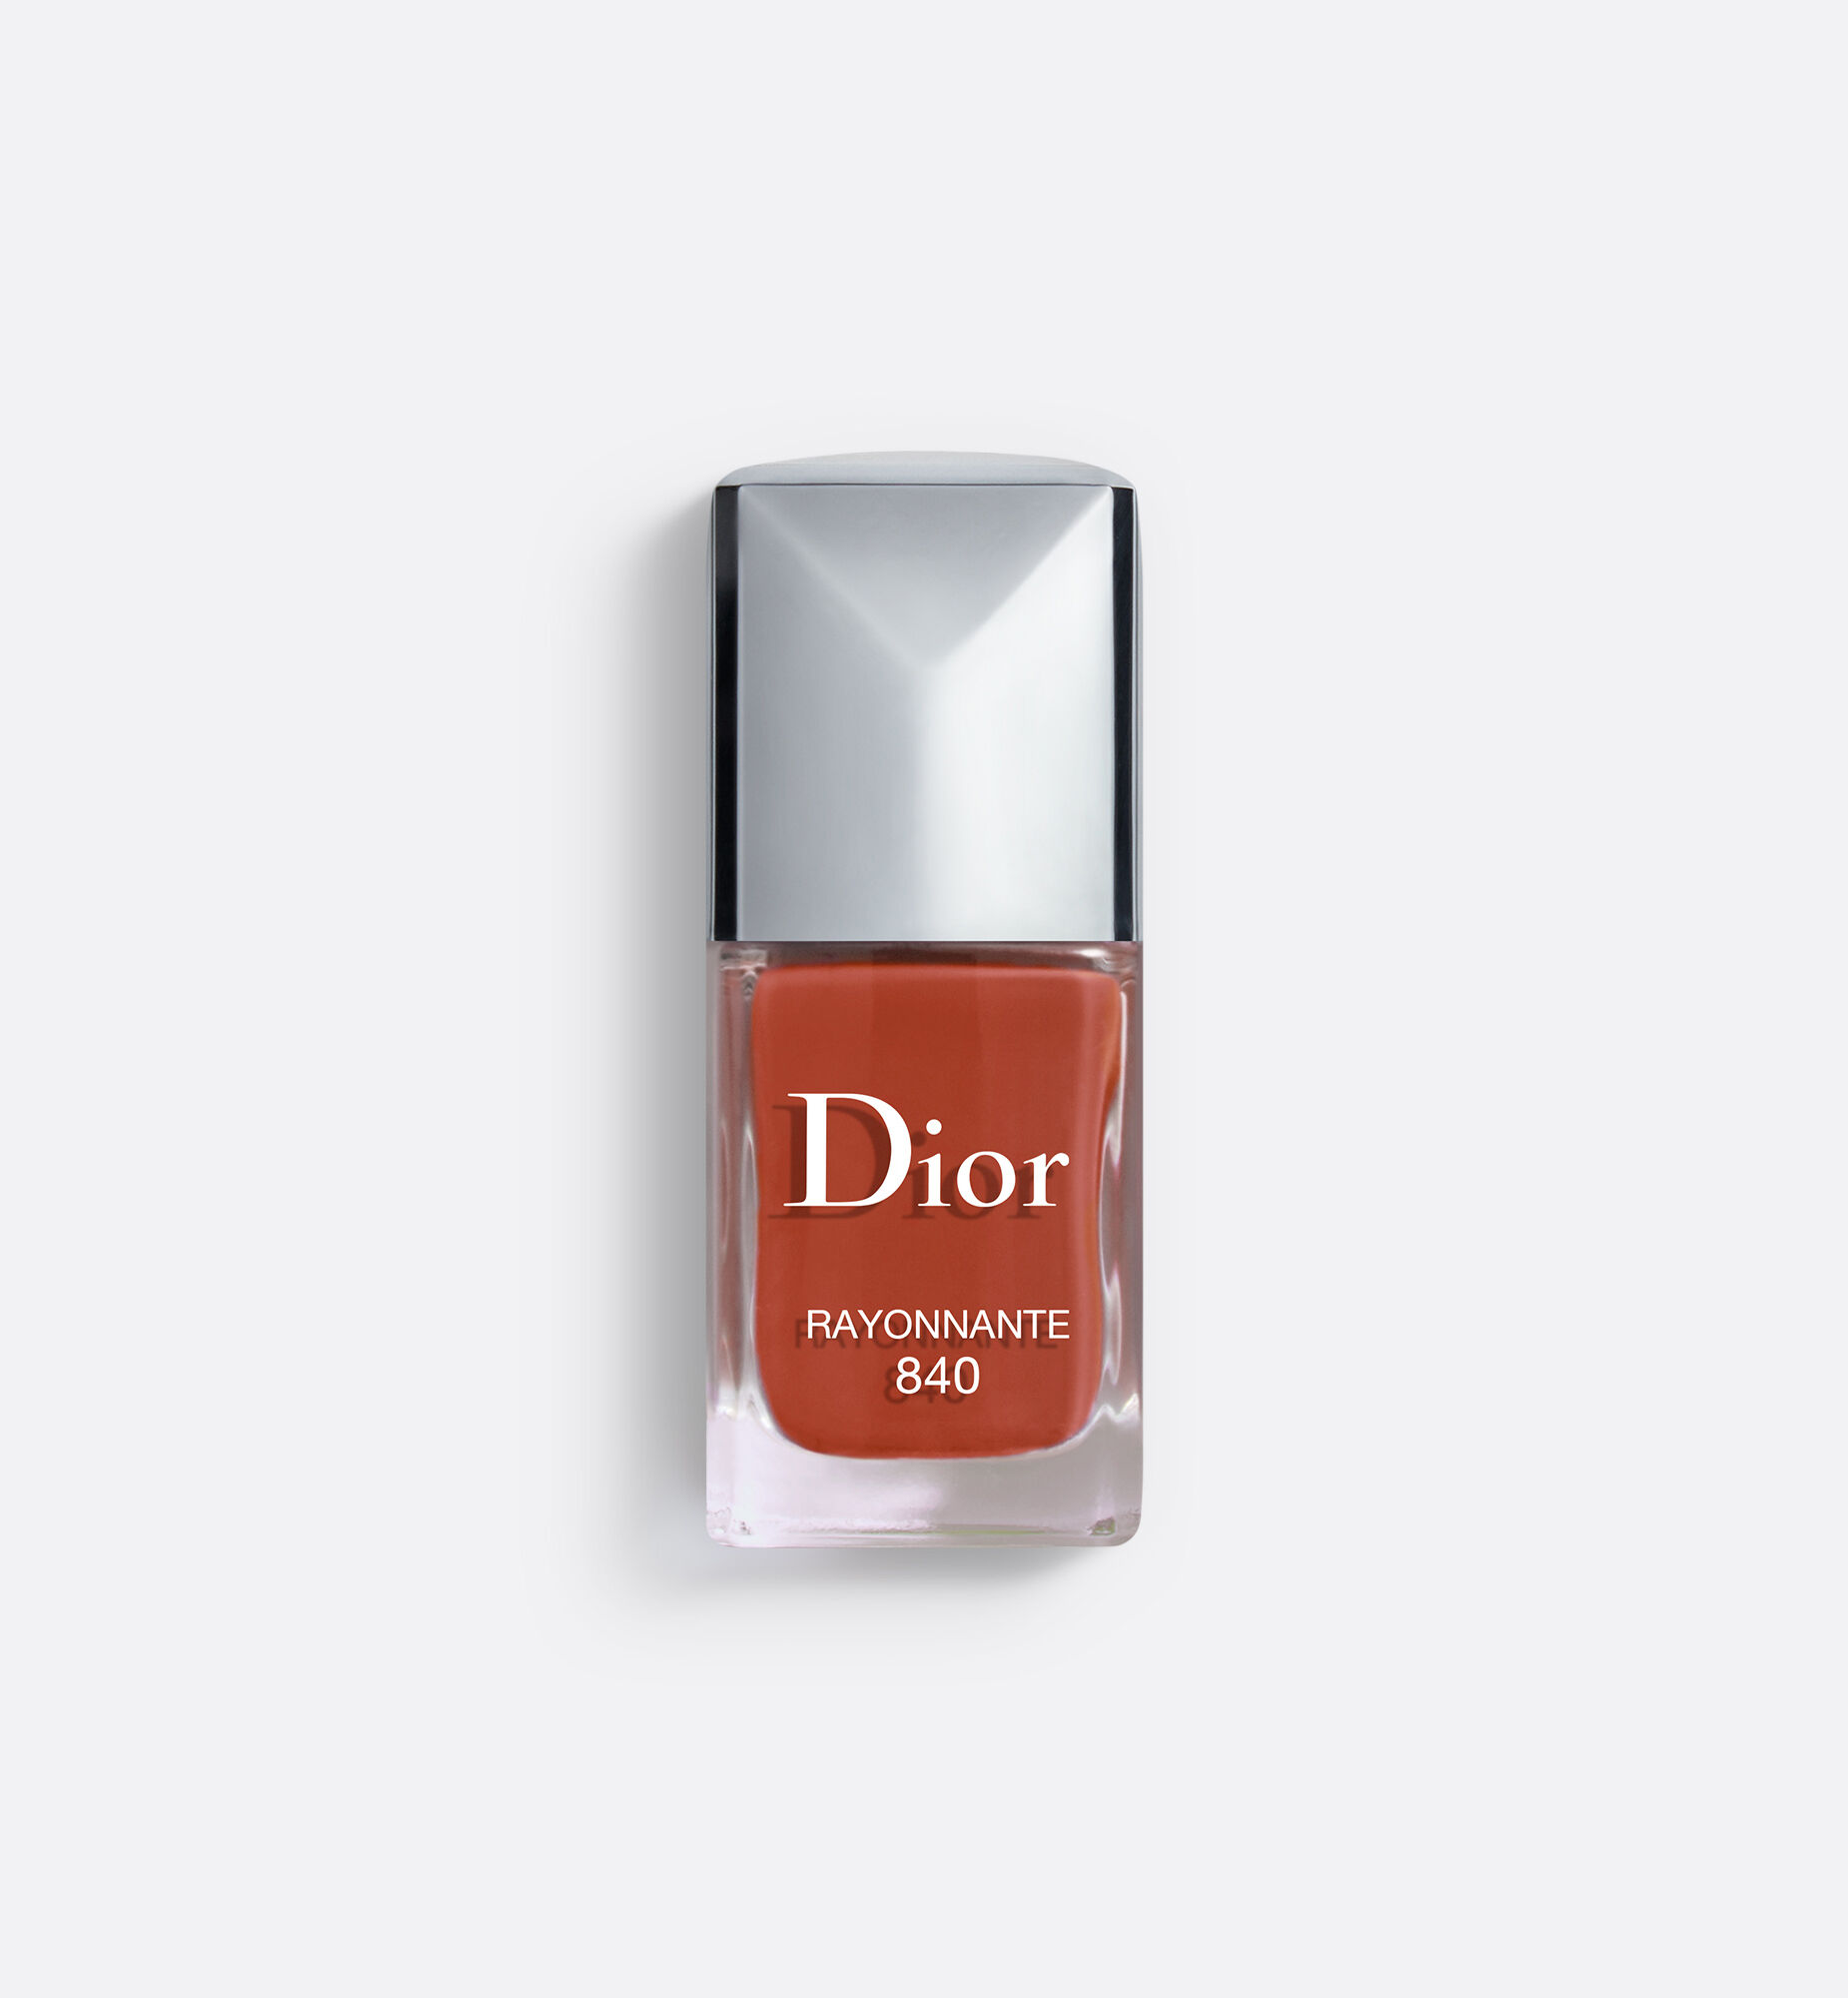 Dior Vernis: Longwear Gel Effect Nail Polish in Couture Colors